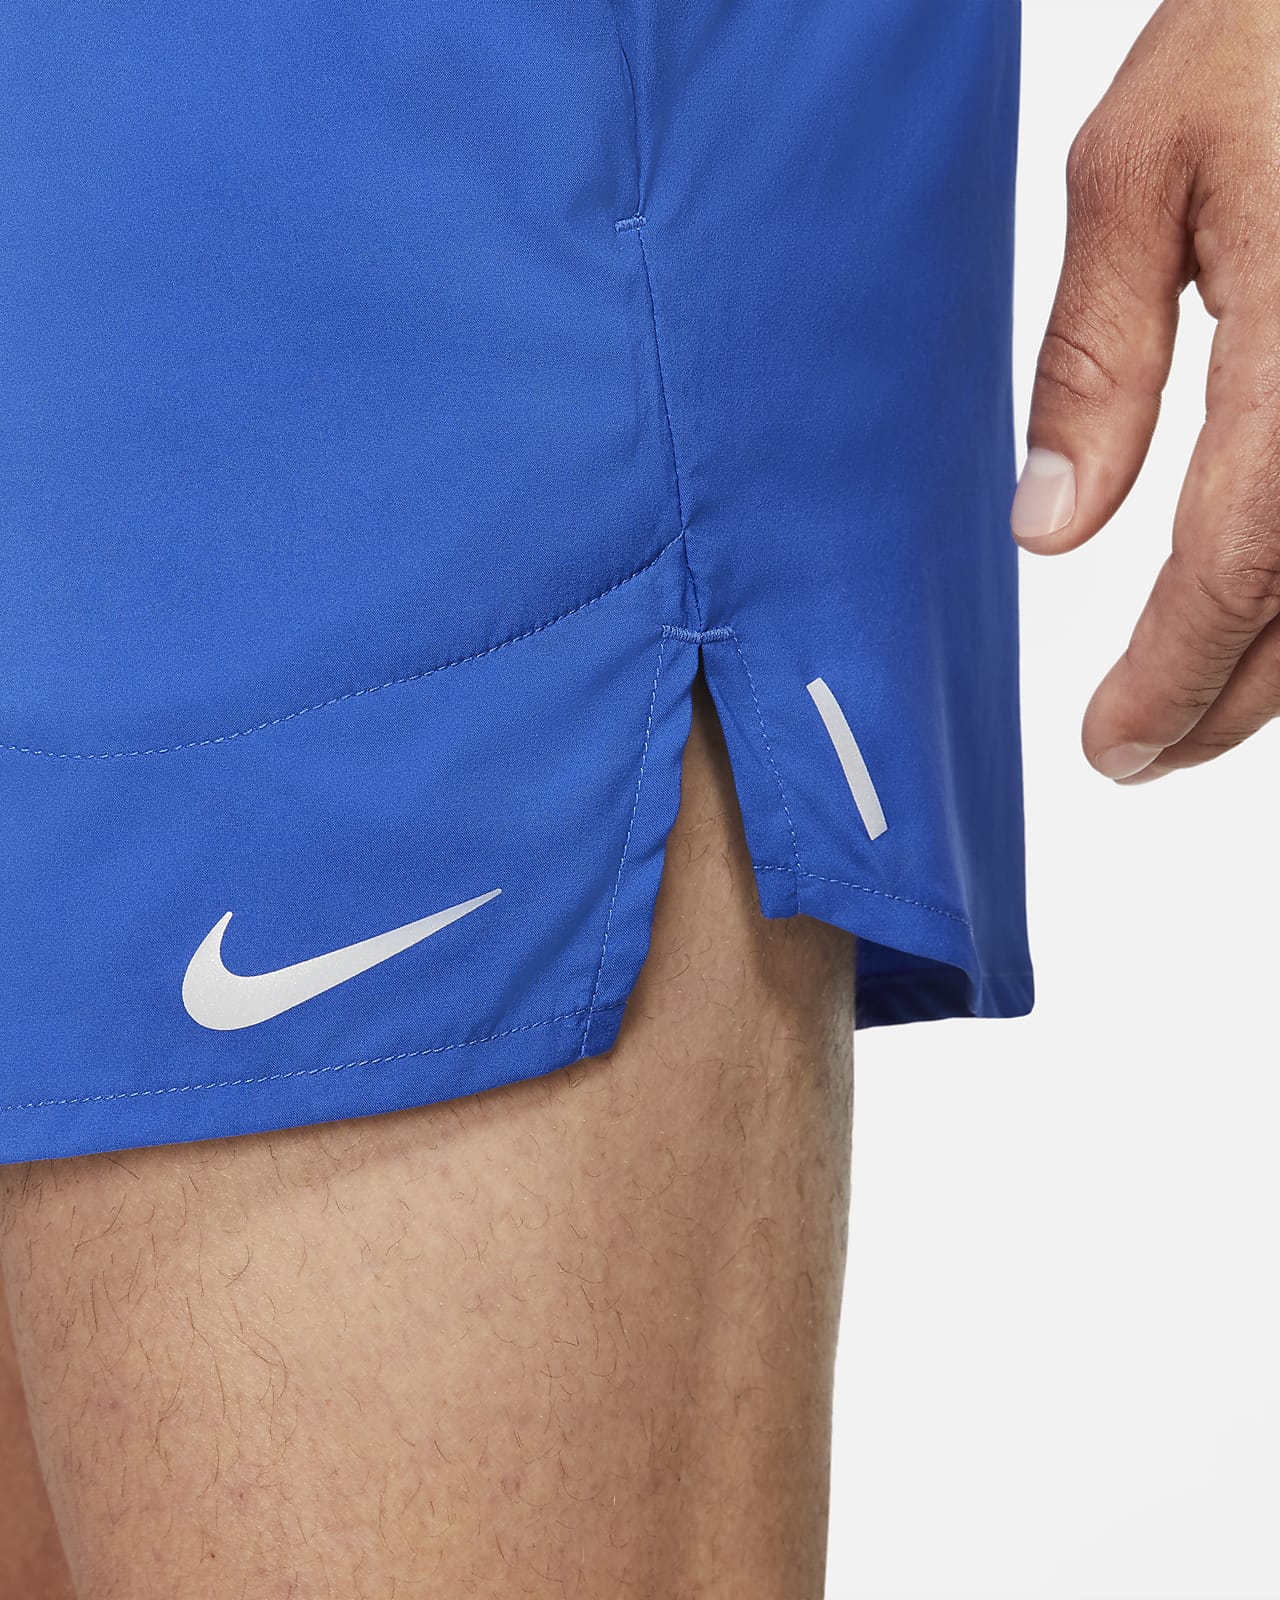 Nike Flex Stride Shorts 5 BF Iron Grey/Heather/Reflective Silver XL 5 :  : Clothing, Shoes & Accessories